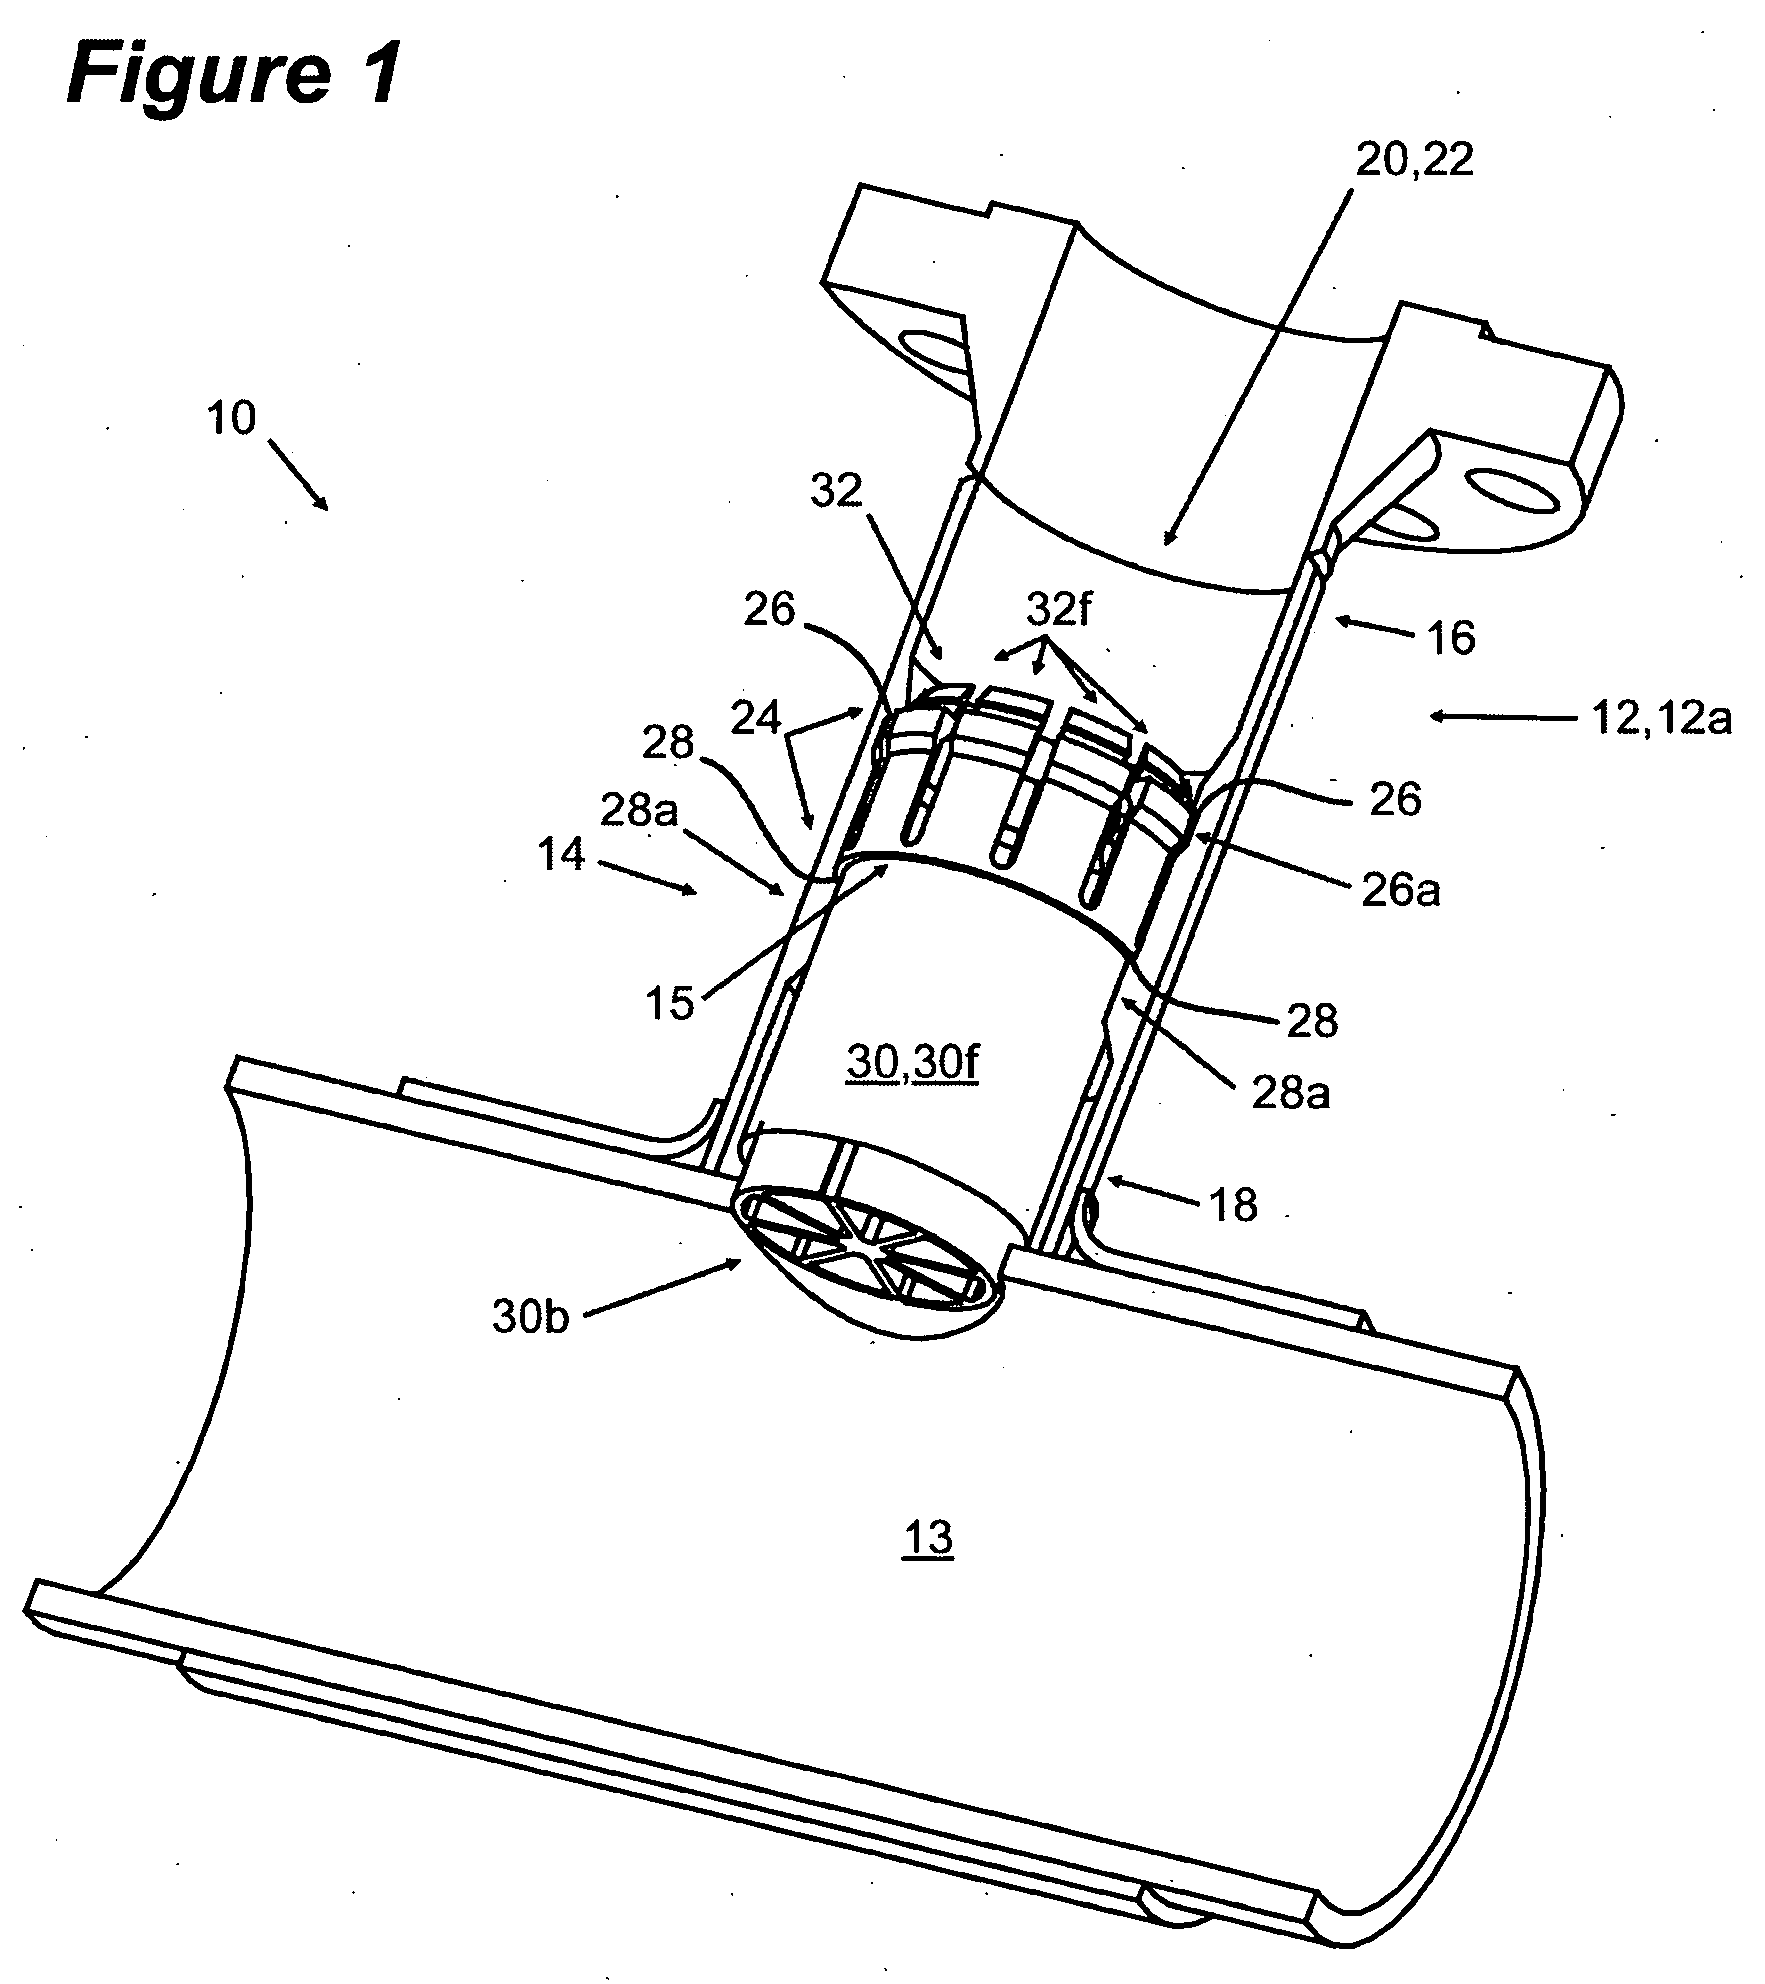 Removable closure system and plug for conduit